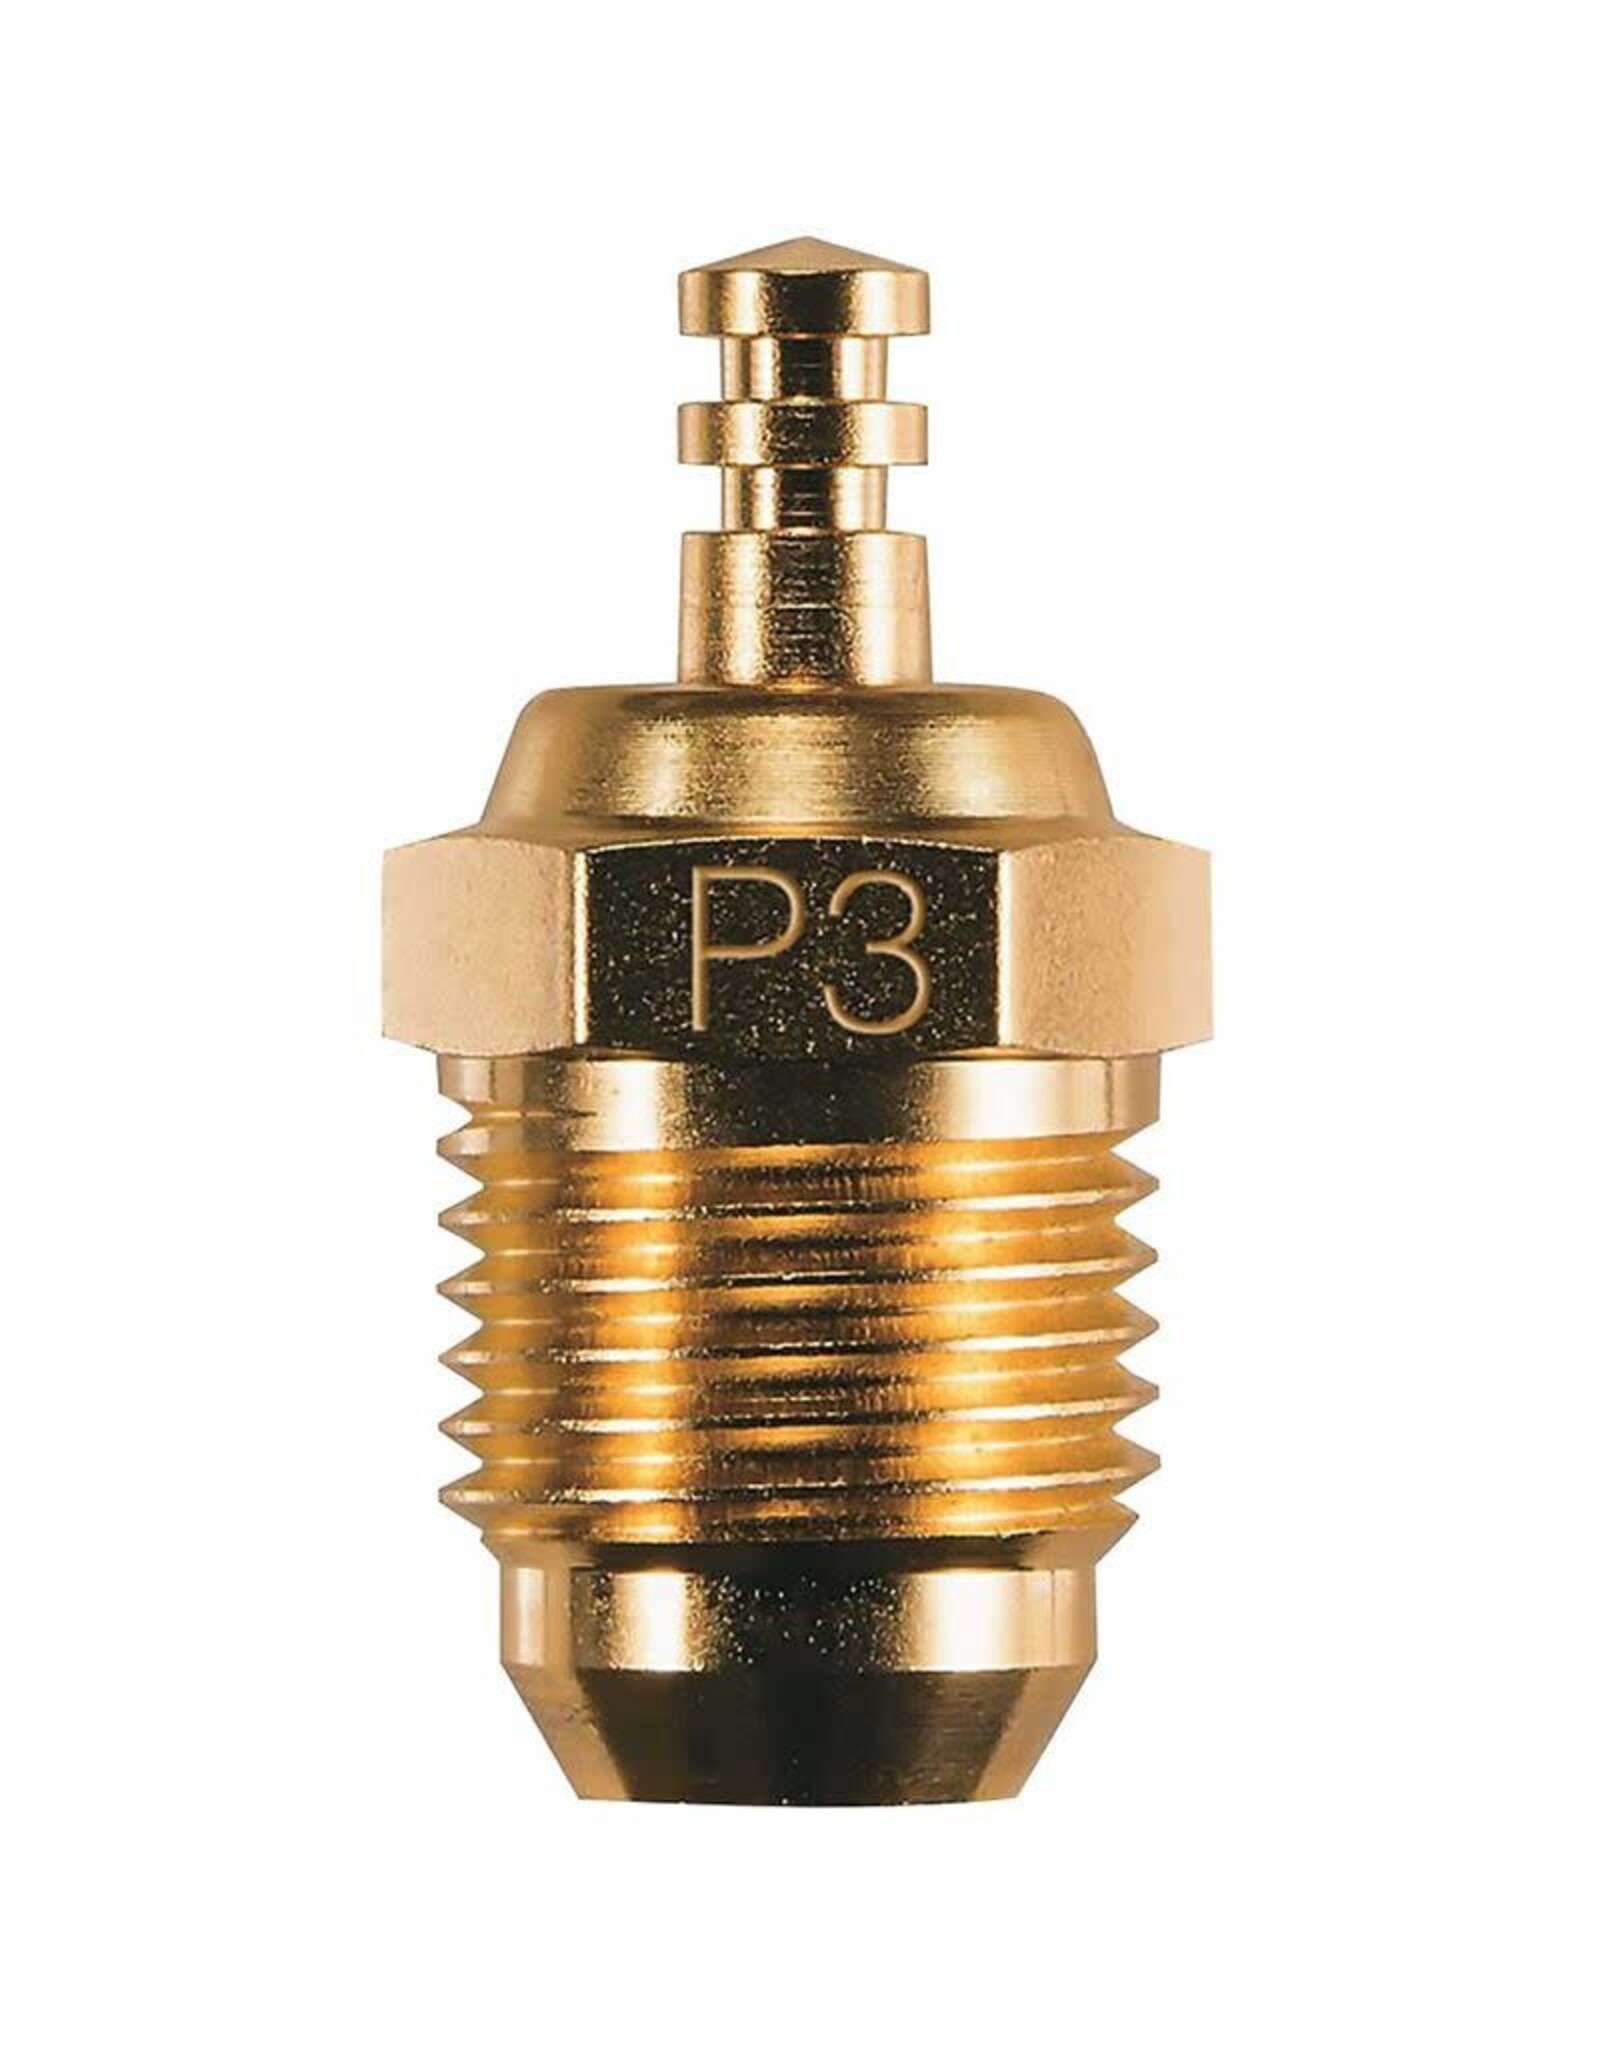 O.S. Engines Speed P3 Gold Ultra Hot Plug